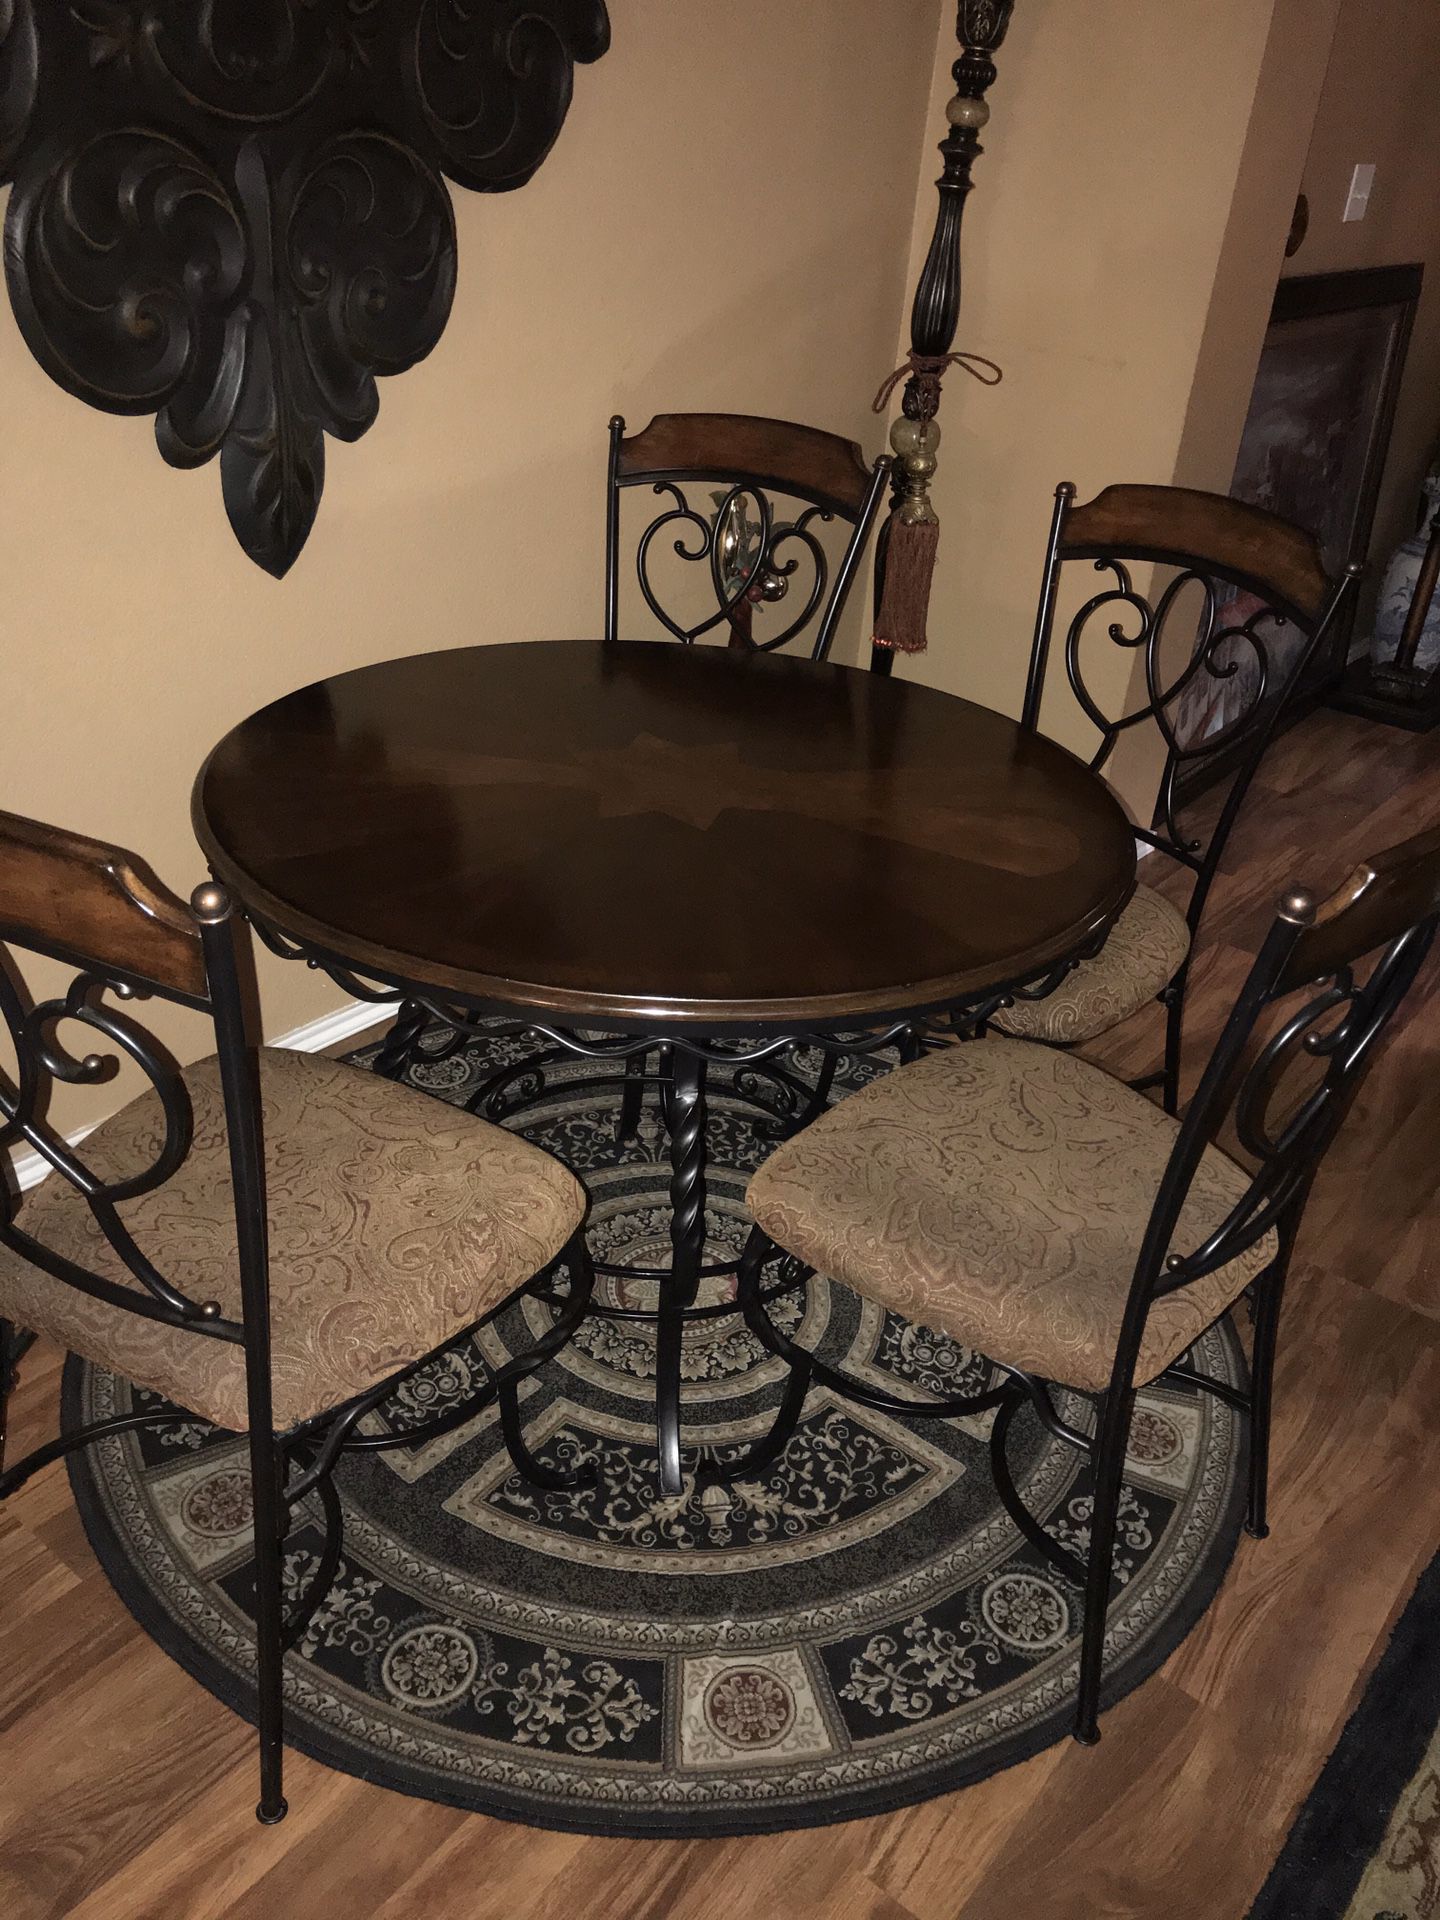 Beautiful & Elegant ASHLEY dining table with 4 chairs, very sturdy & clean.